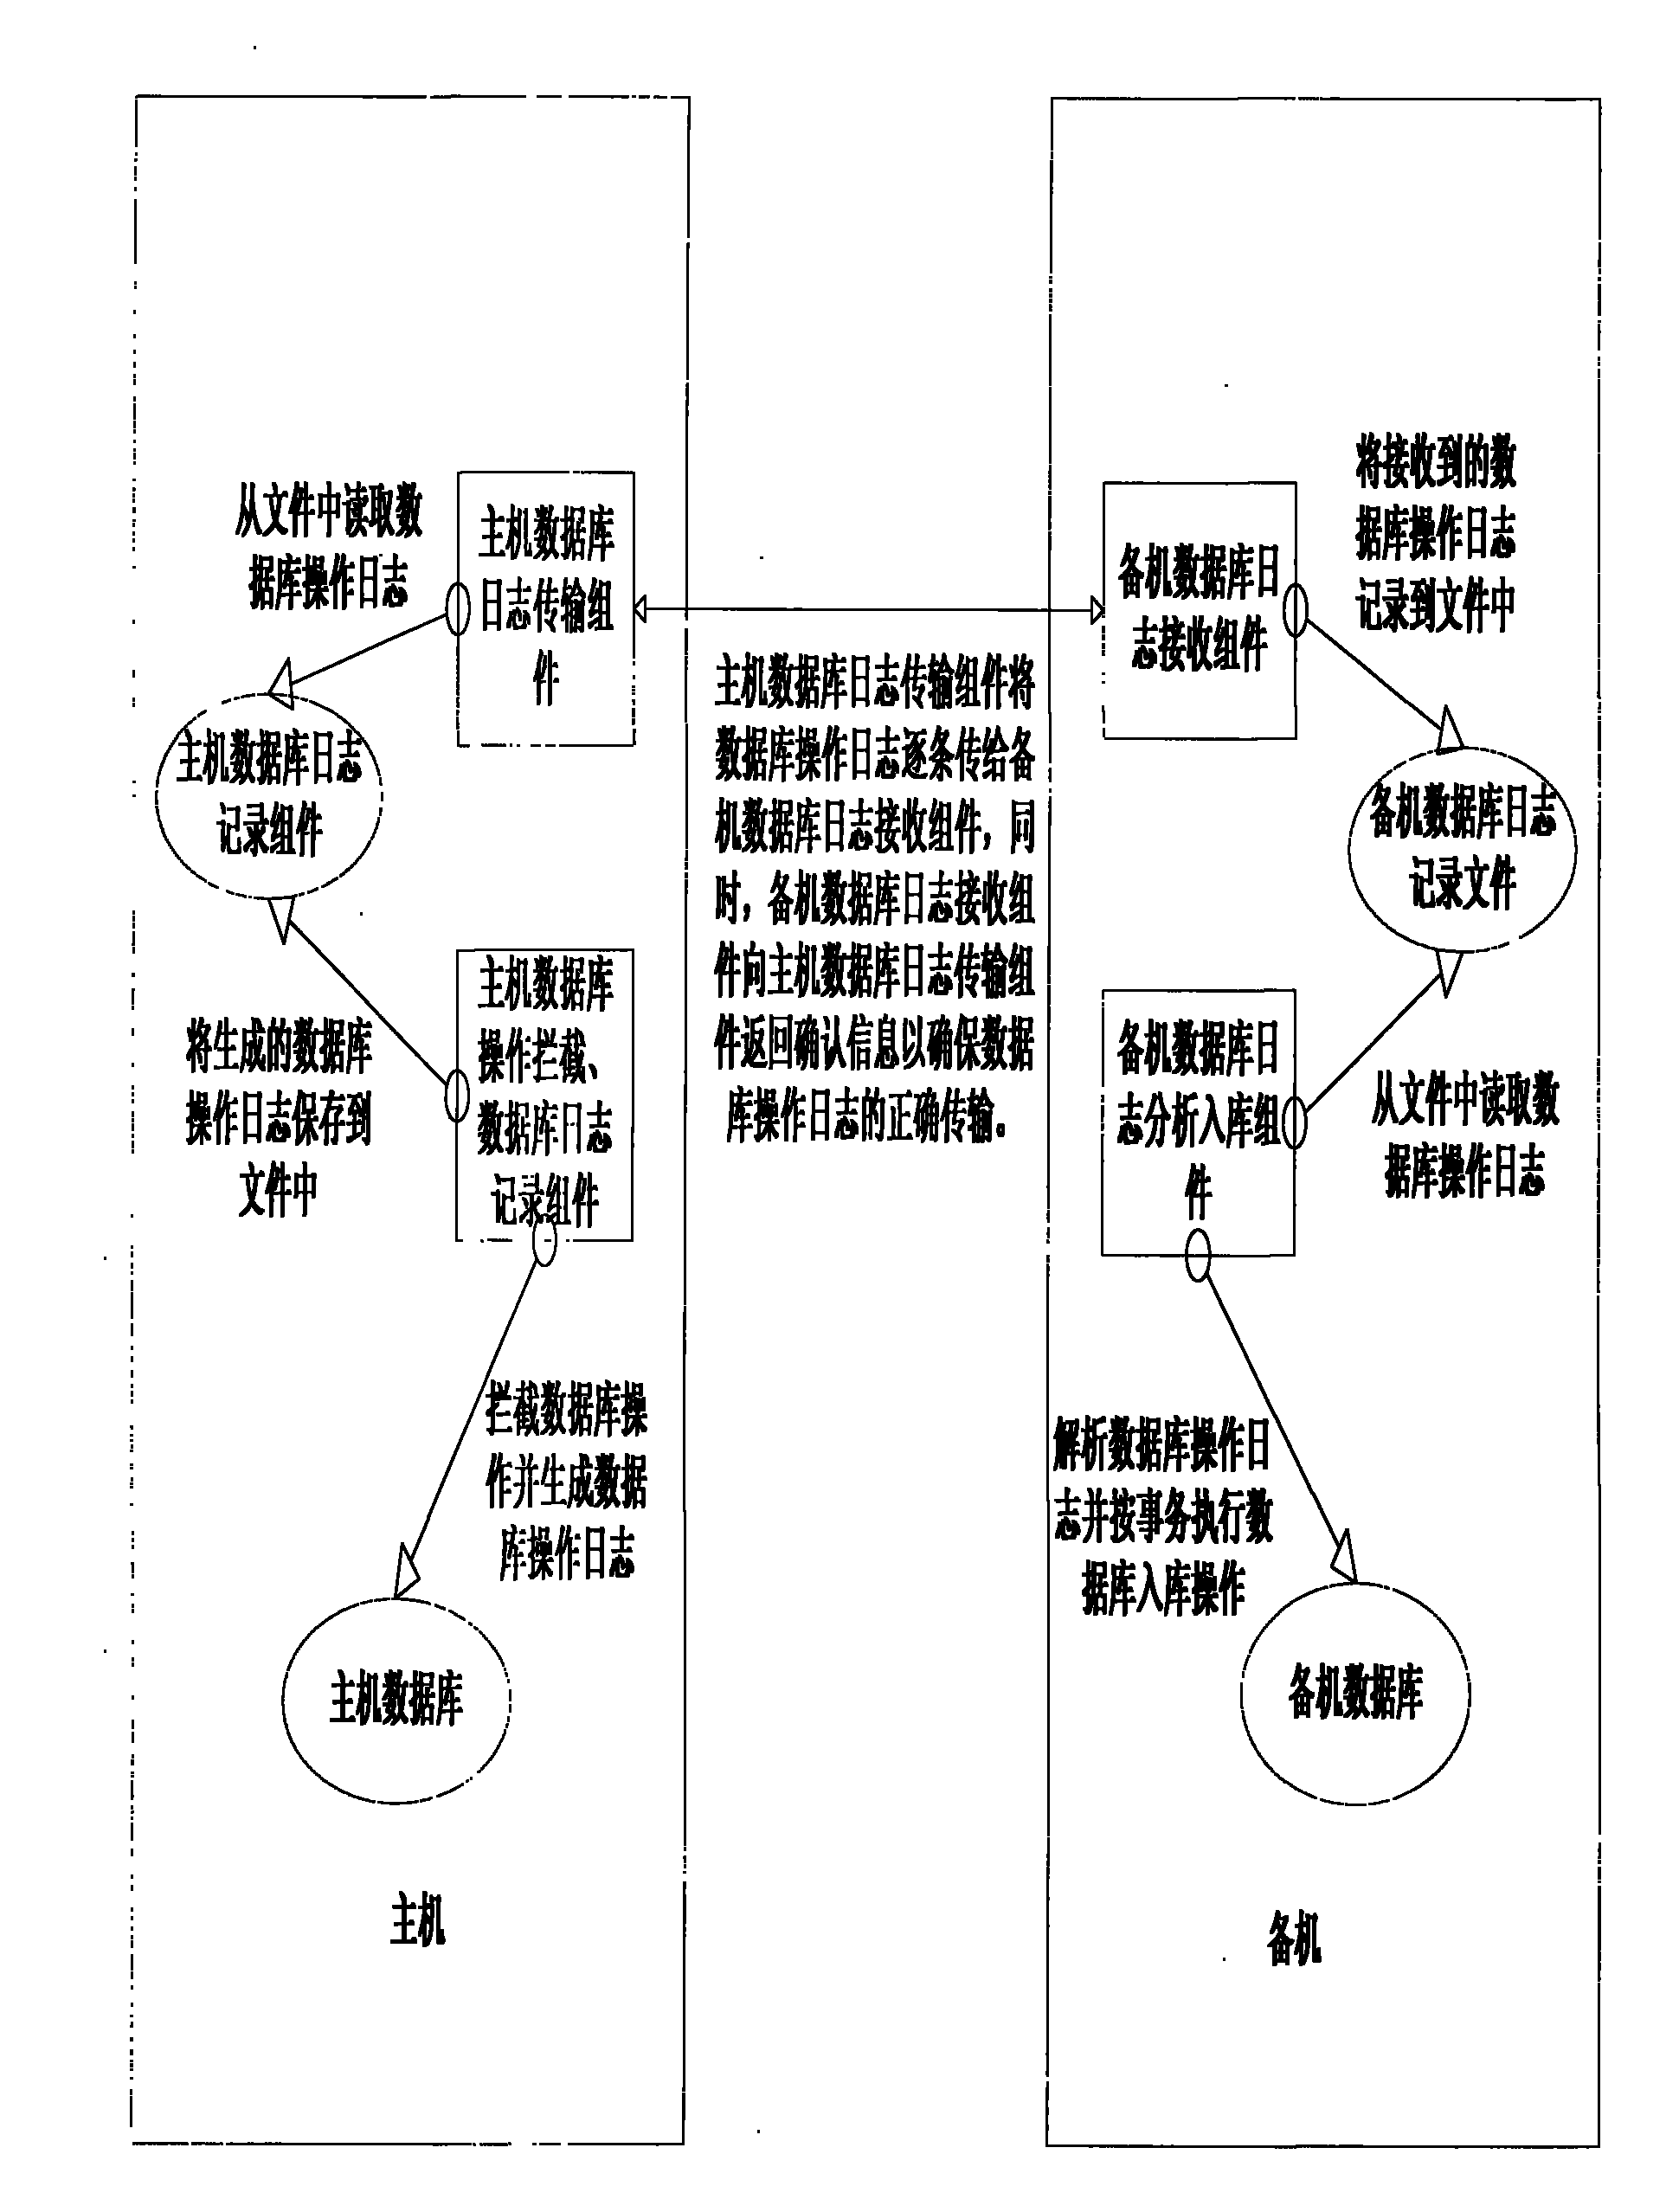 Method and device for synchronizing databases of master network management system and standby network management system